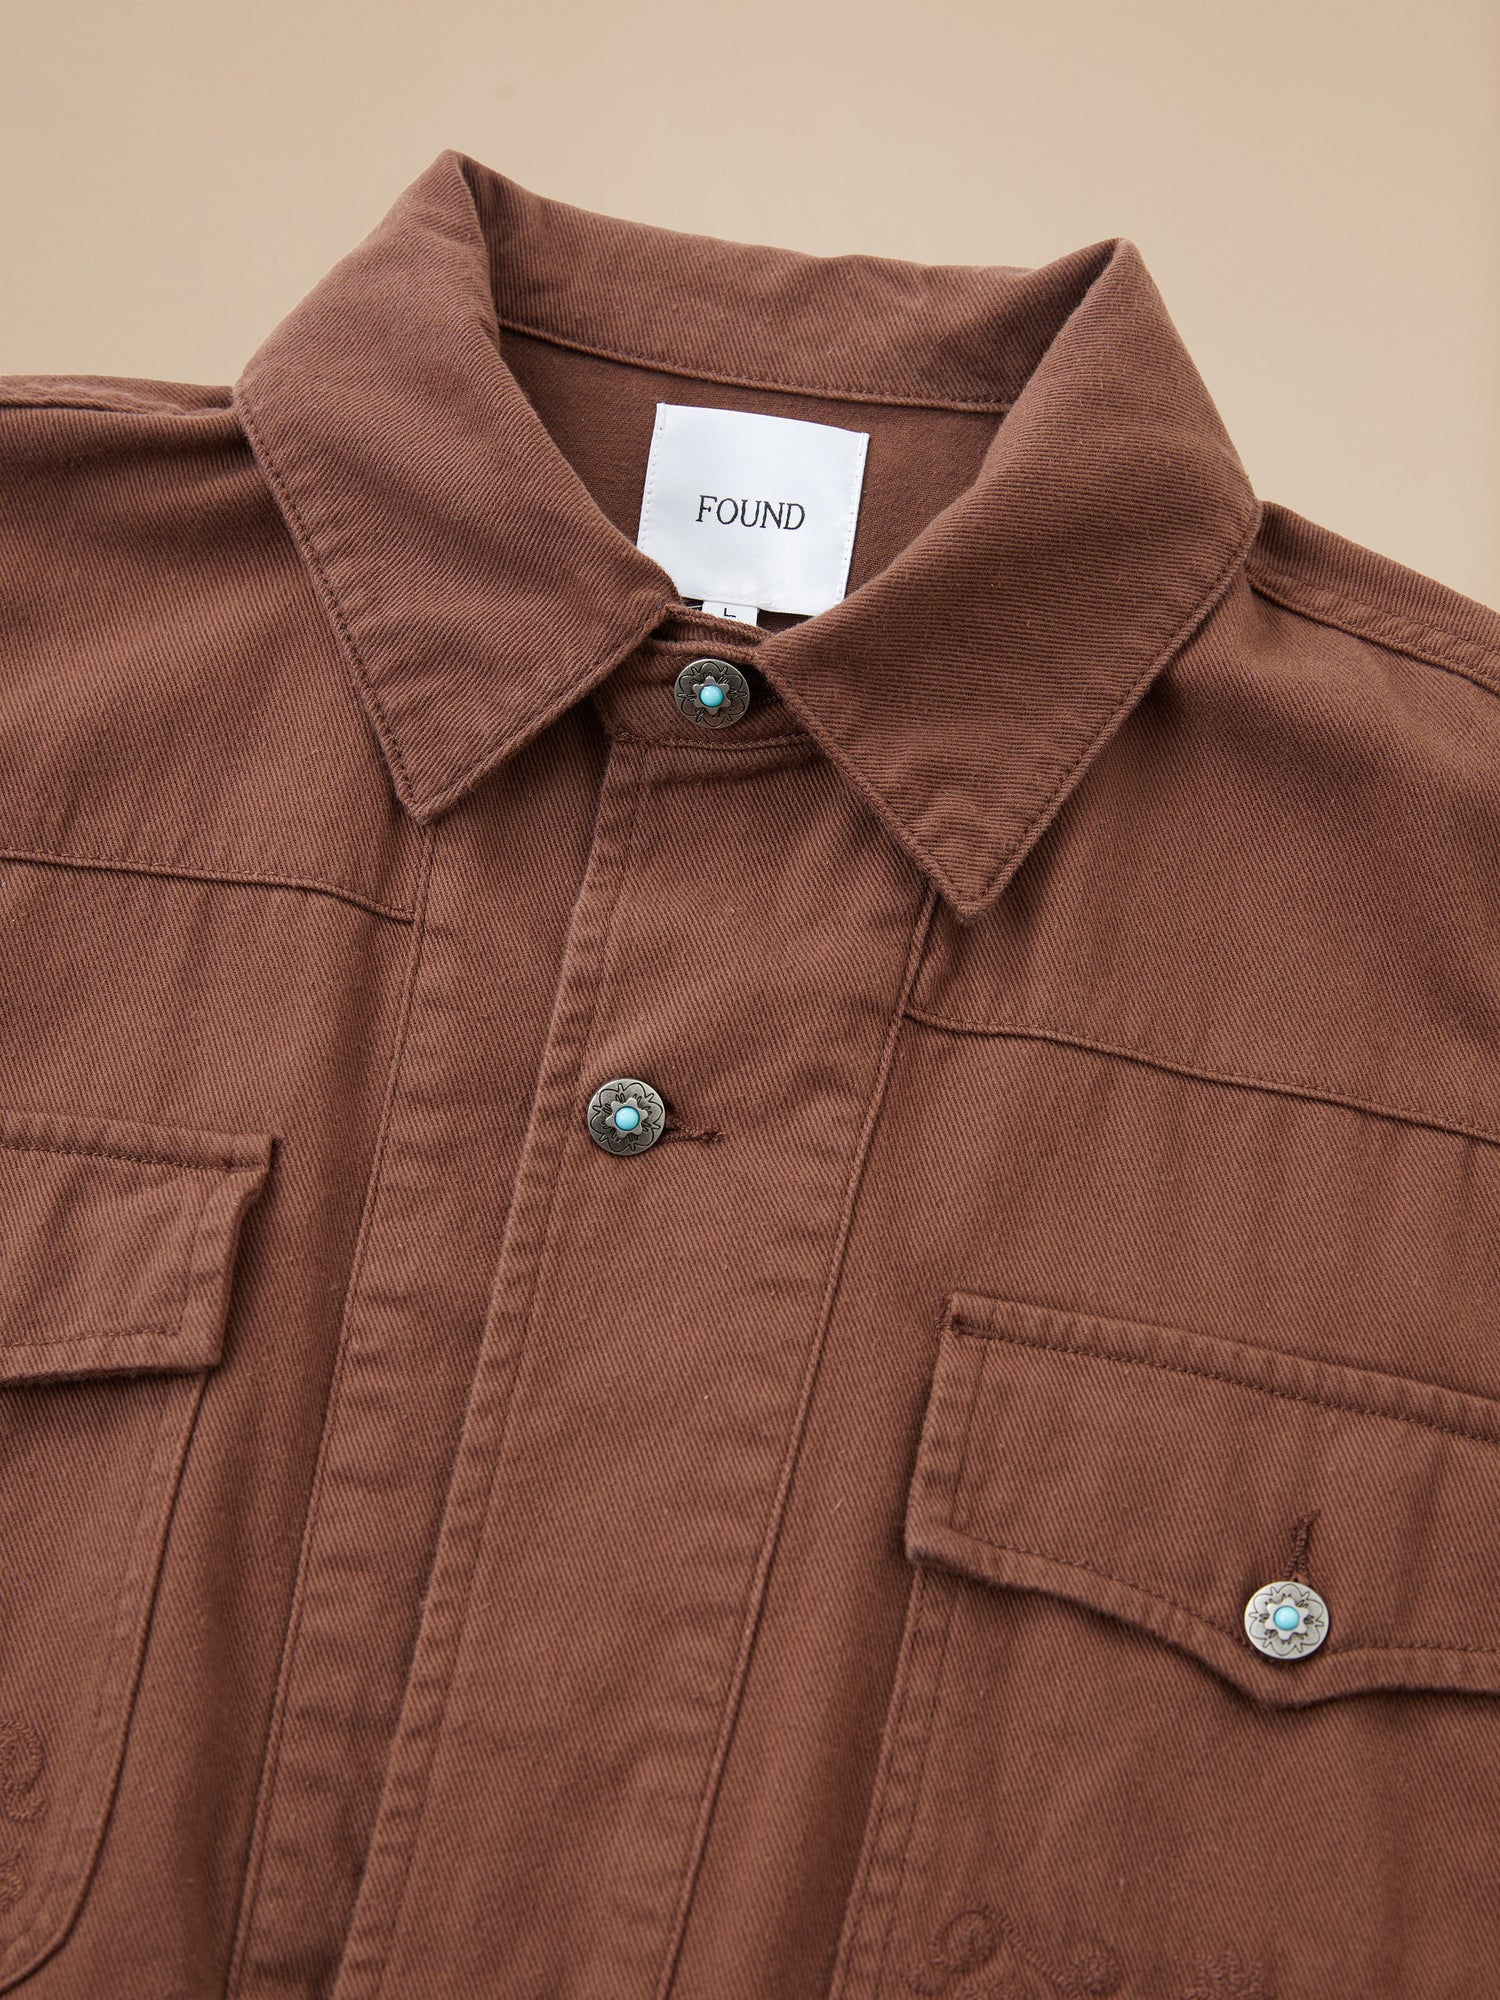 A Dusky Western Trucker Jacket by Found with buttons and pockets.